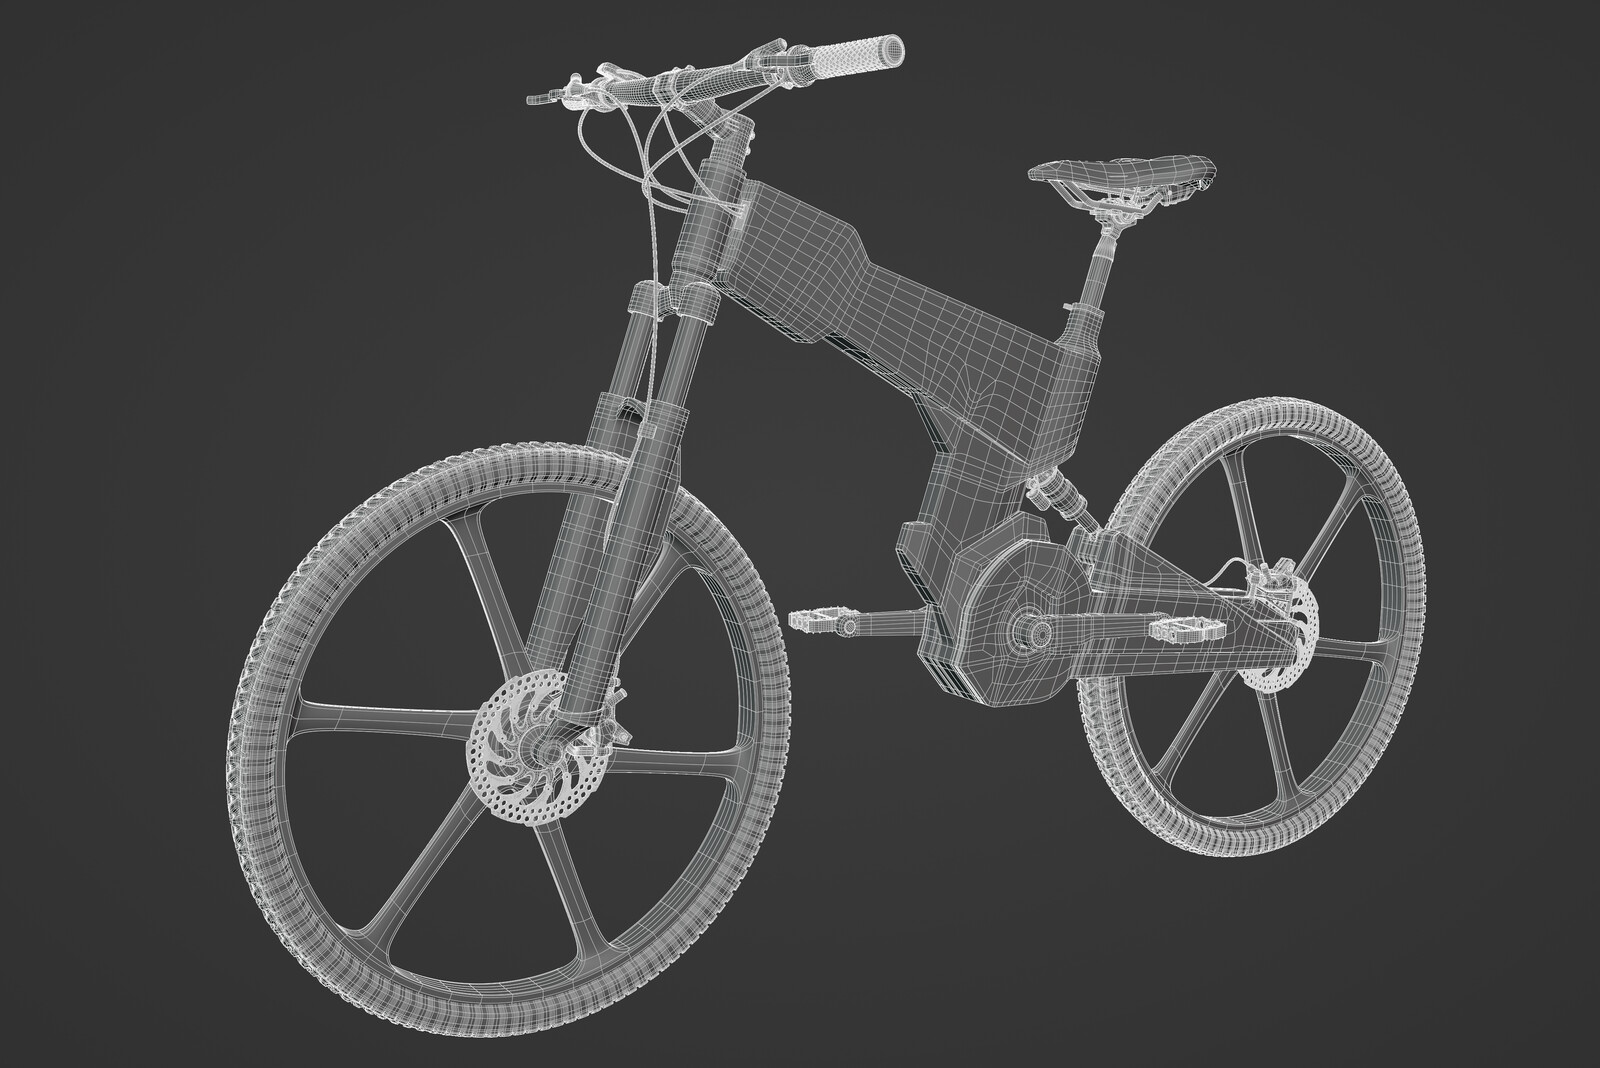 Wireframe side view